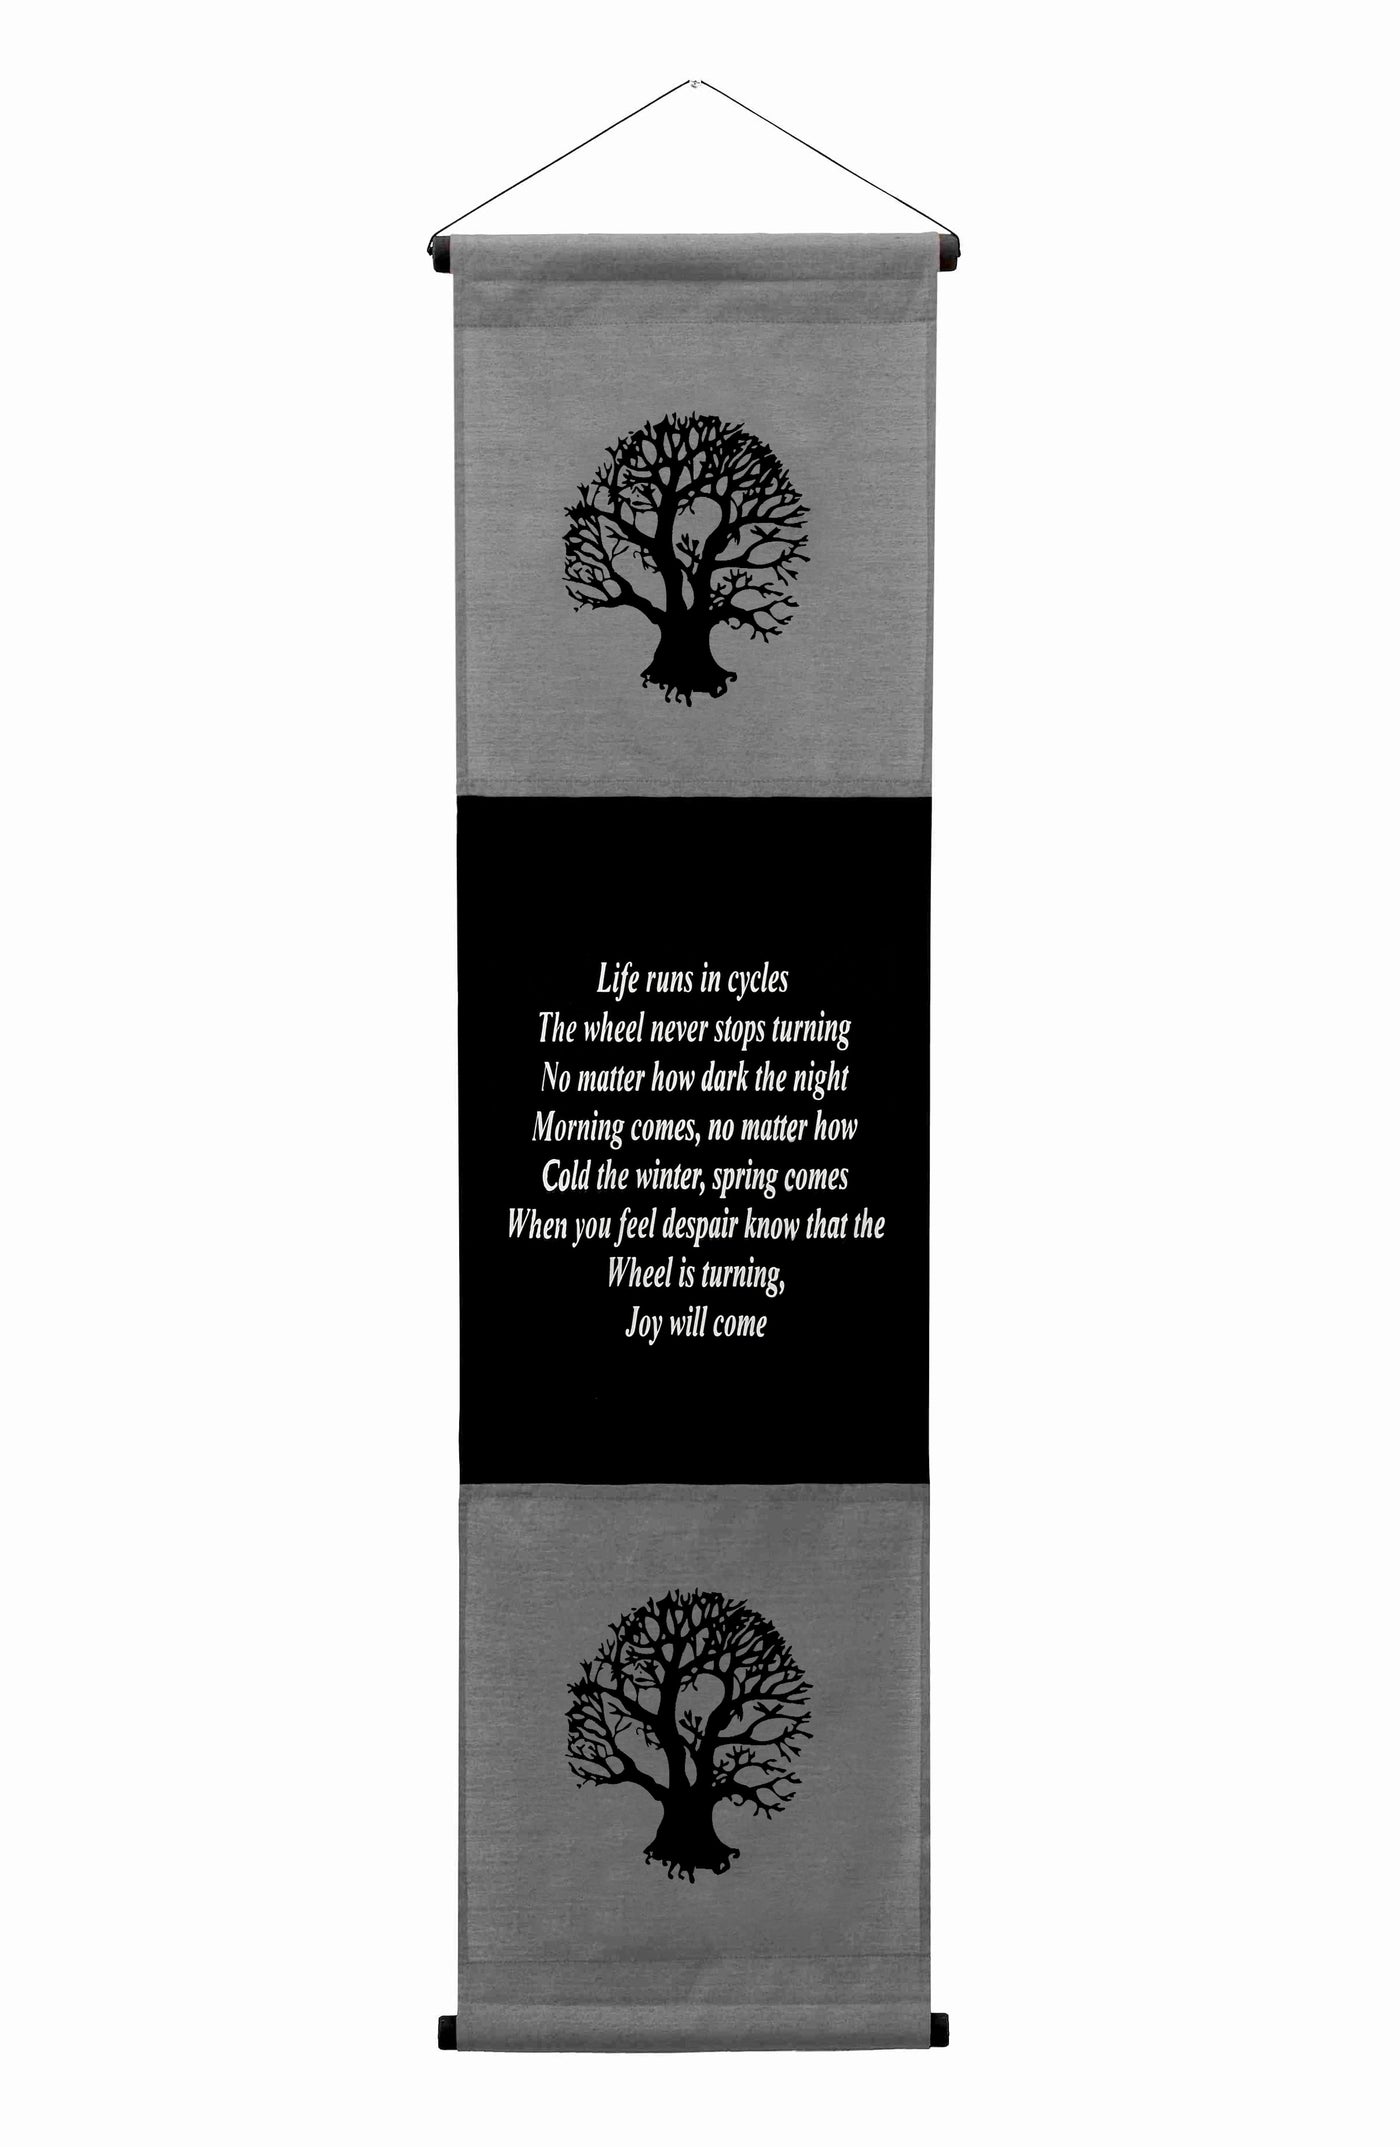 Inspirational Wall Decor "Life Run in Cycles" Banner Art, Inspiring Quote Hanging Scroll, Affirmation Motivational Uplifting Message, Saying Tapestry